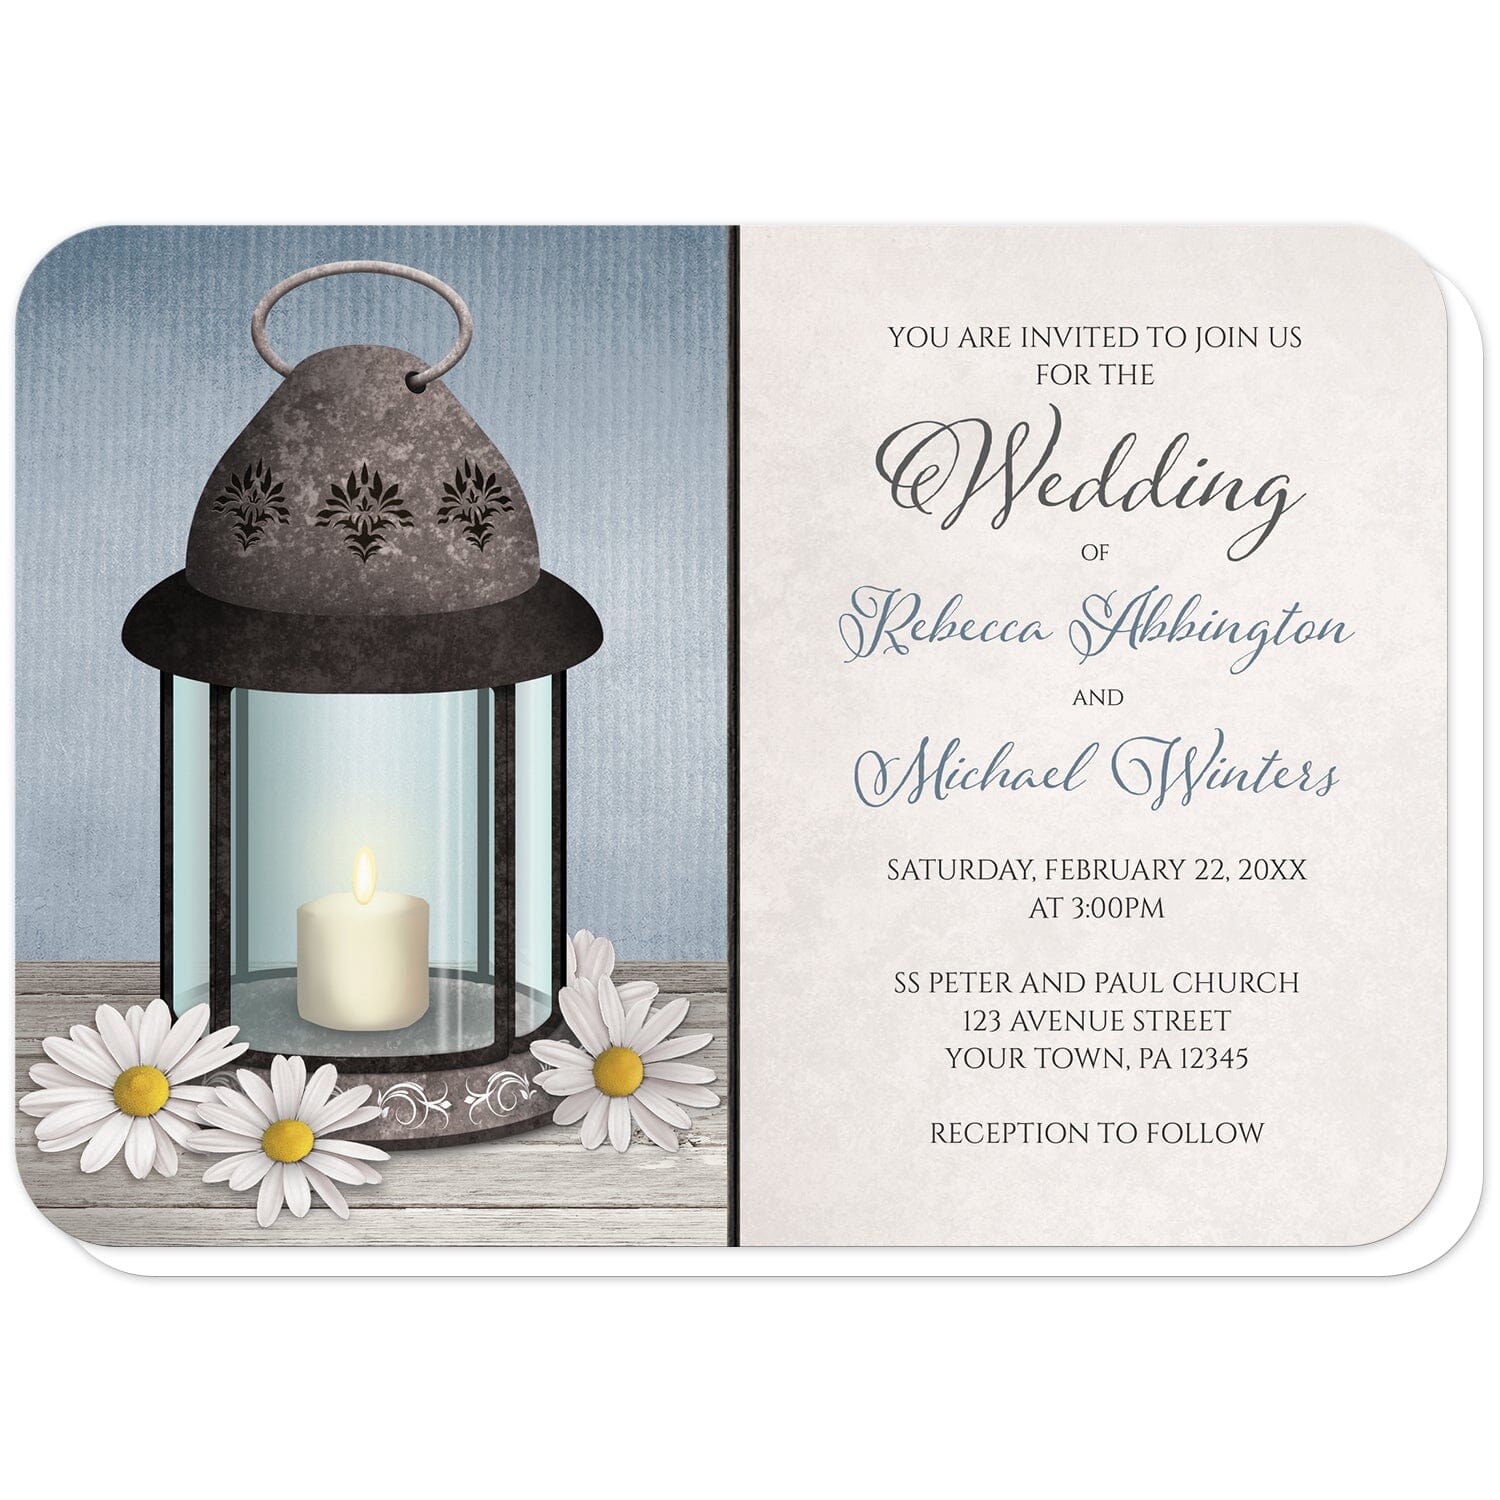 Lantern Daisy Rustic Blue Wedding Invitations (with rounded corners) at Artistically Invited. Country-inspired lantern daisy rustic blue wedding invitations featuring an old but elegant ornate metal lantern with a lit candle inside and daisies around it on a light wood tabletop, over a rustic blue background. Your personalized wedding details are custom printed in gray and blue over a light parchment background design, beside the lantern illustration.